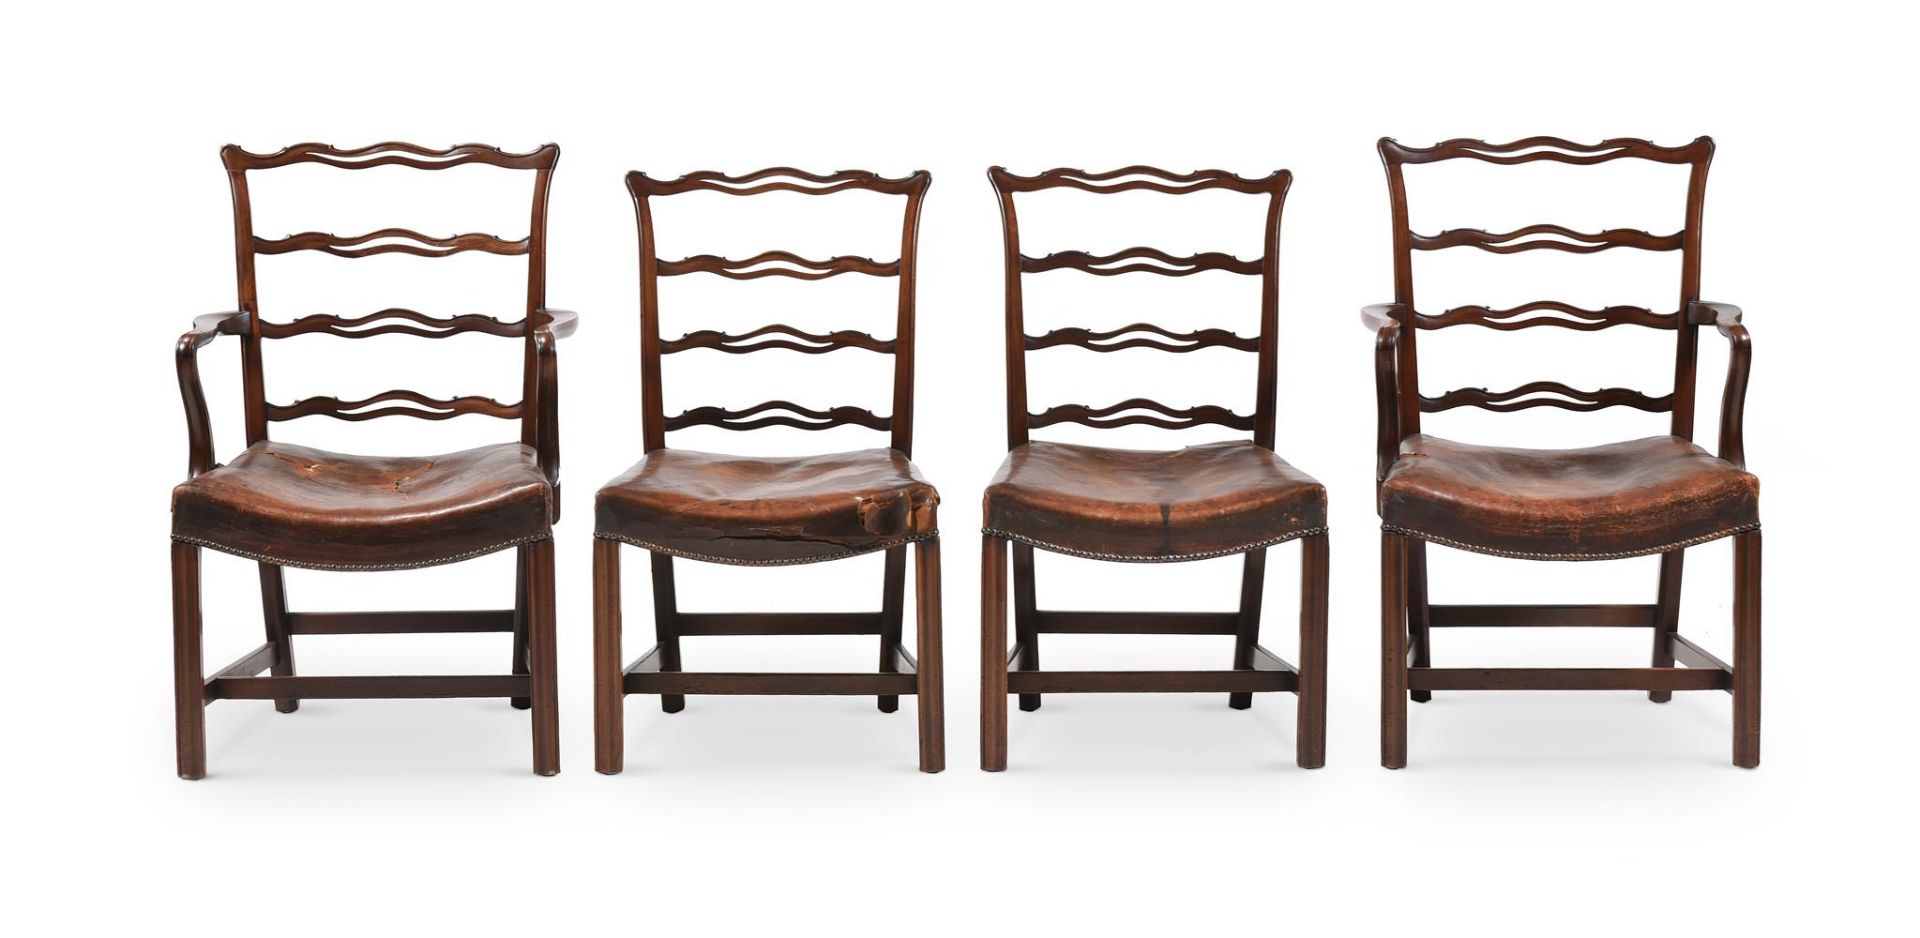 A HARLEQUIN SET OF FOURTEEN MAHOGANY AND UPHOLSTERED LADDERBACK DINING CHAIRS, LATE 19TH CENTURY - Image 4 of 6